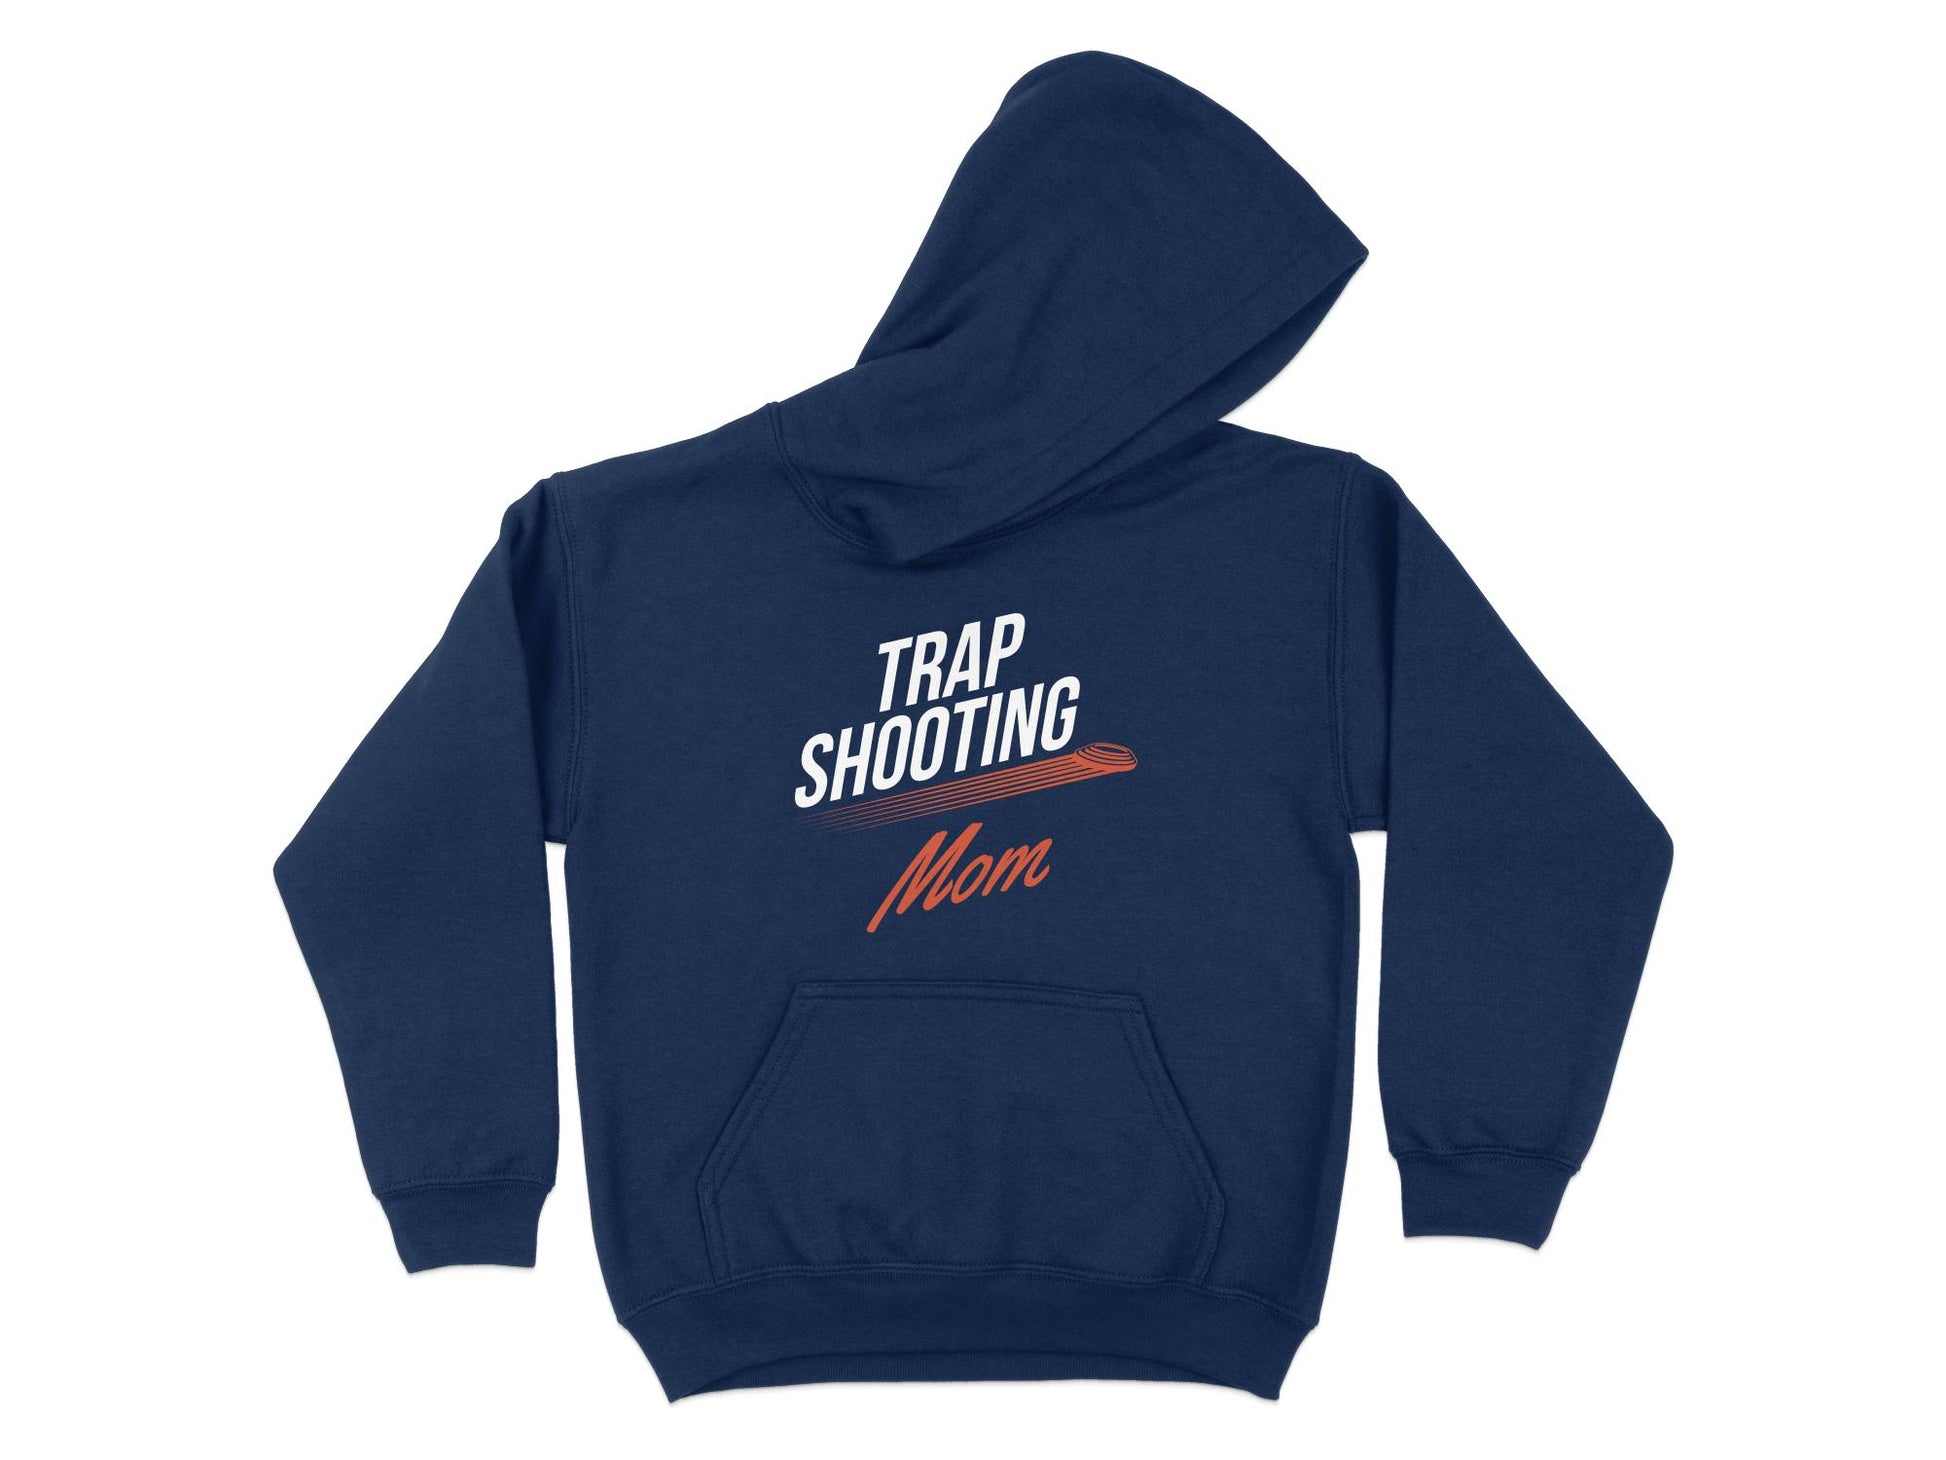 Trap Shooting Hoodie for Moms, navy blue